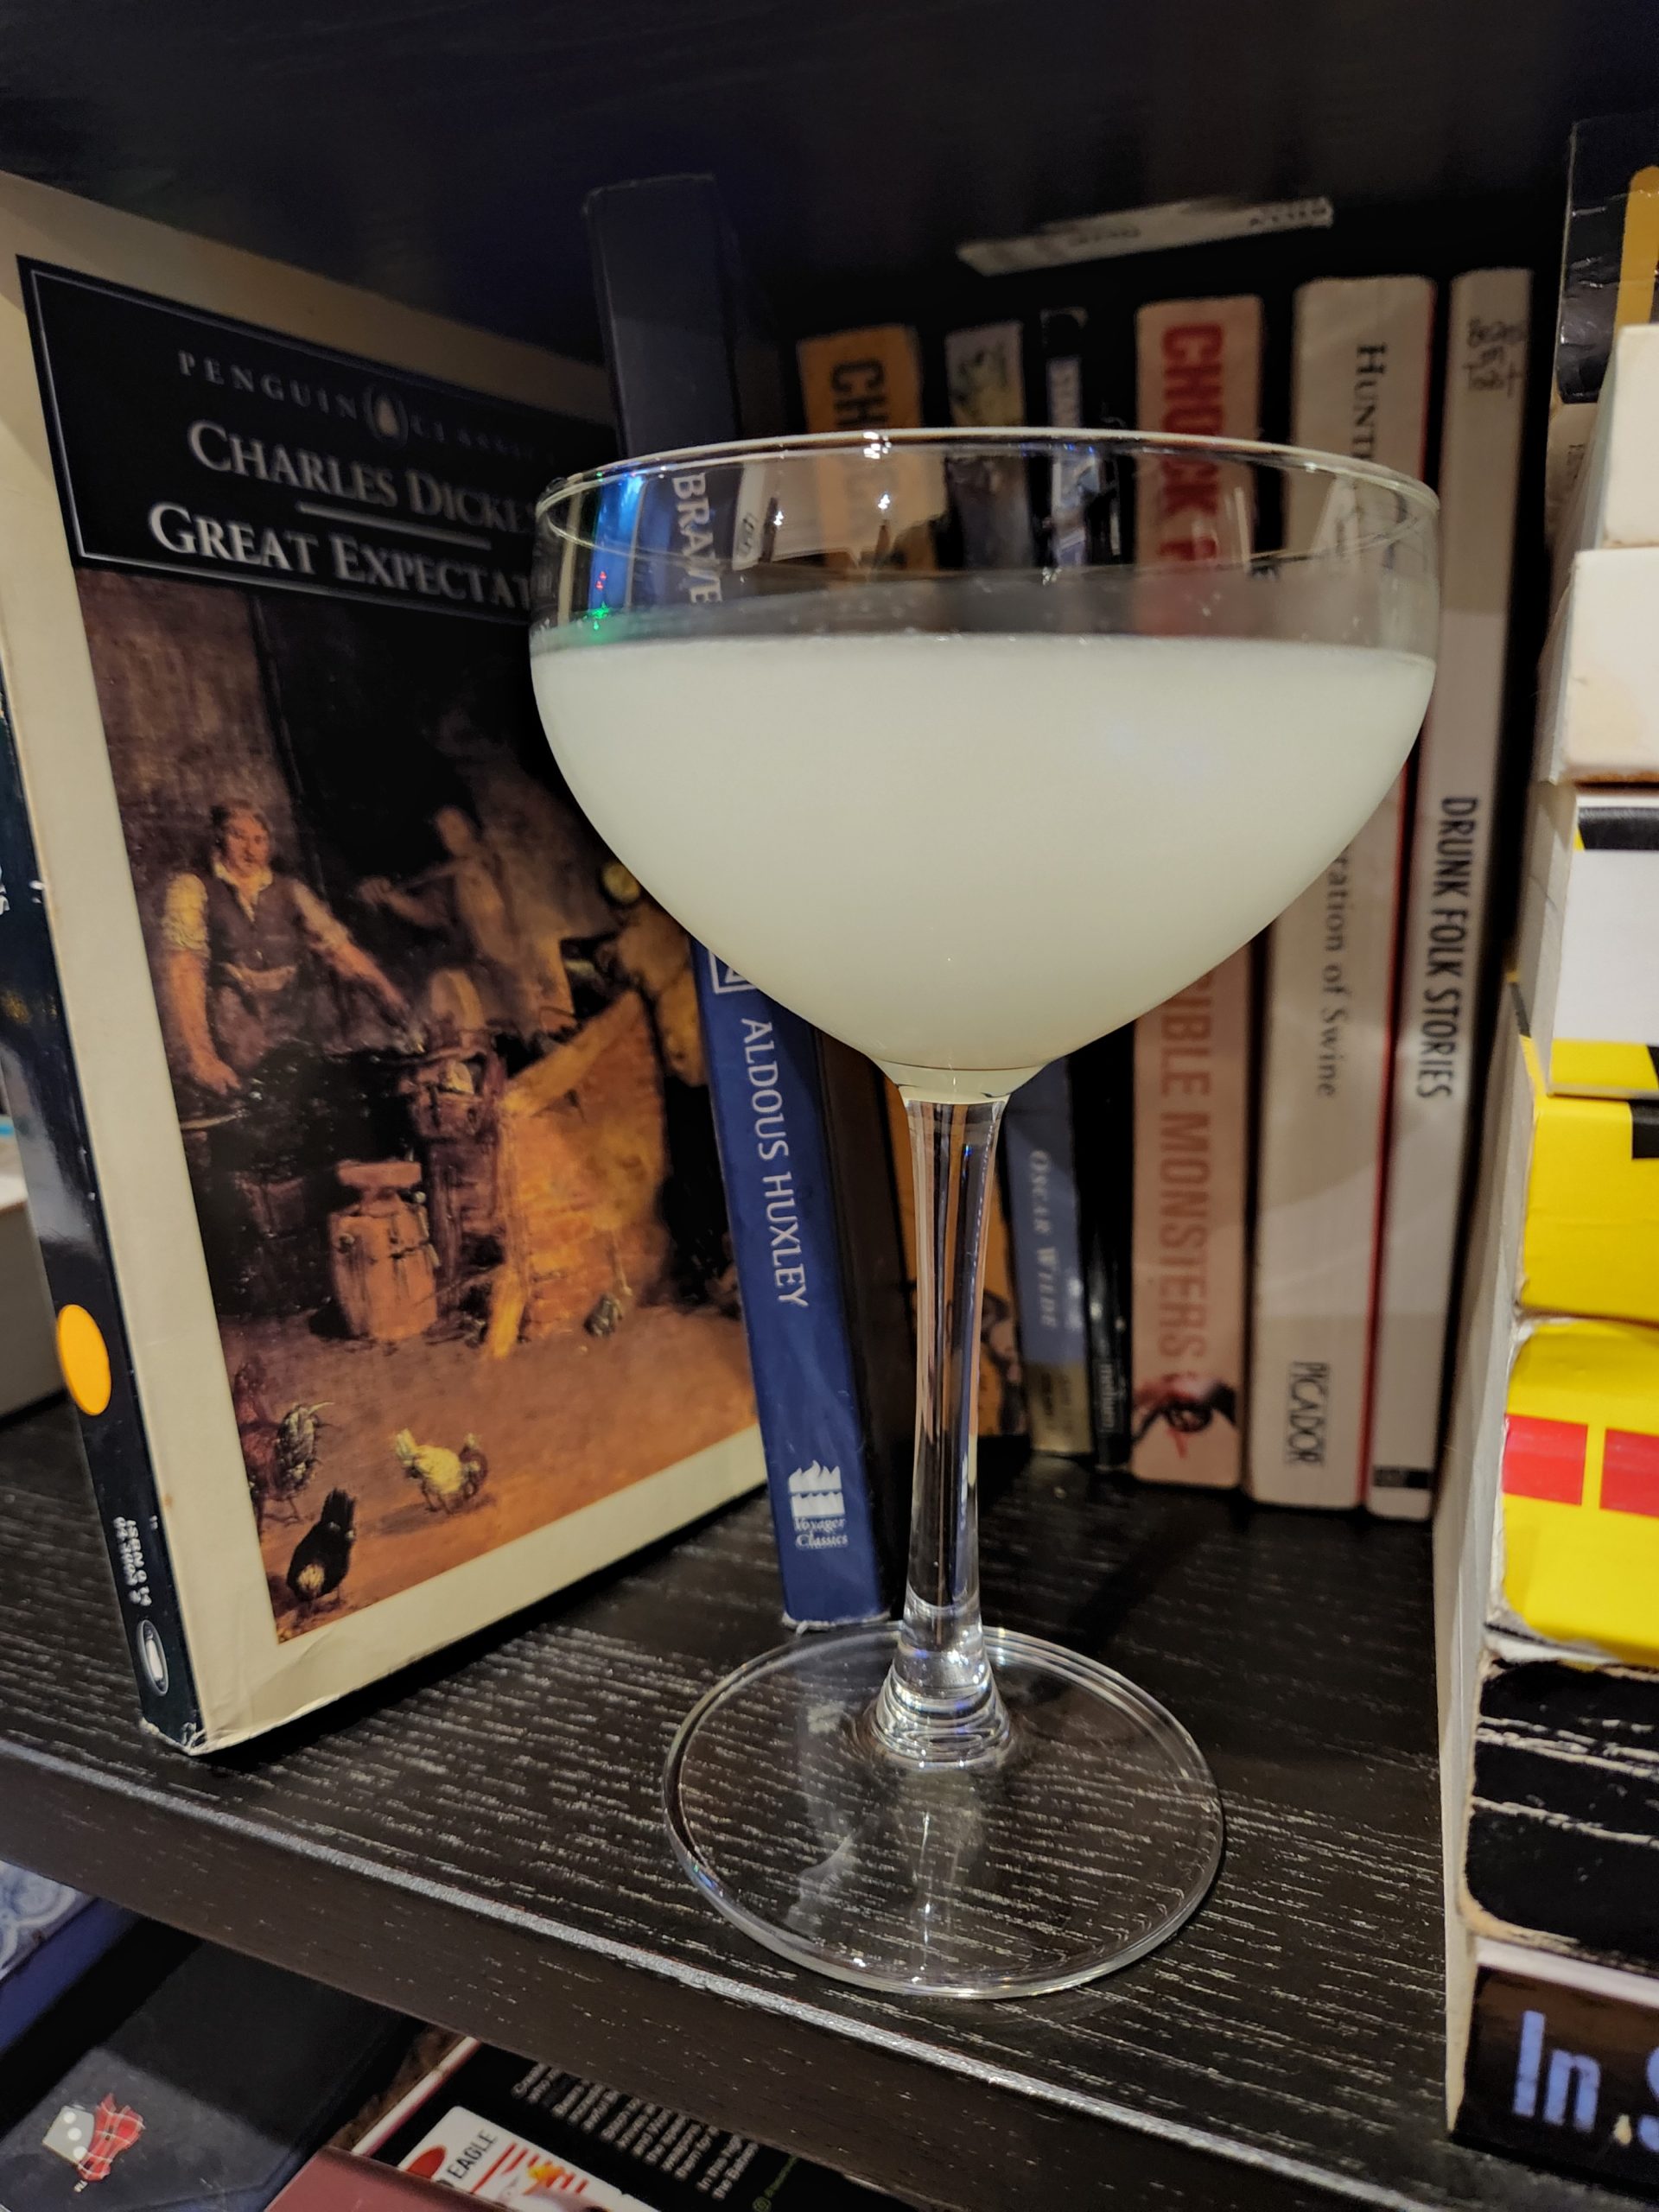 A Corpse Reviver cocktail on a book shelf.